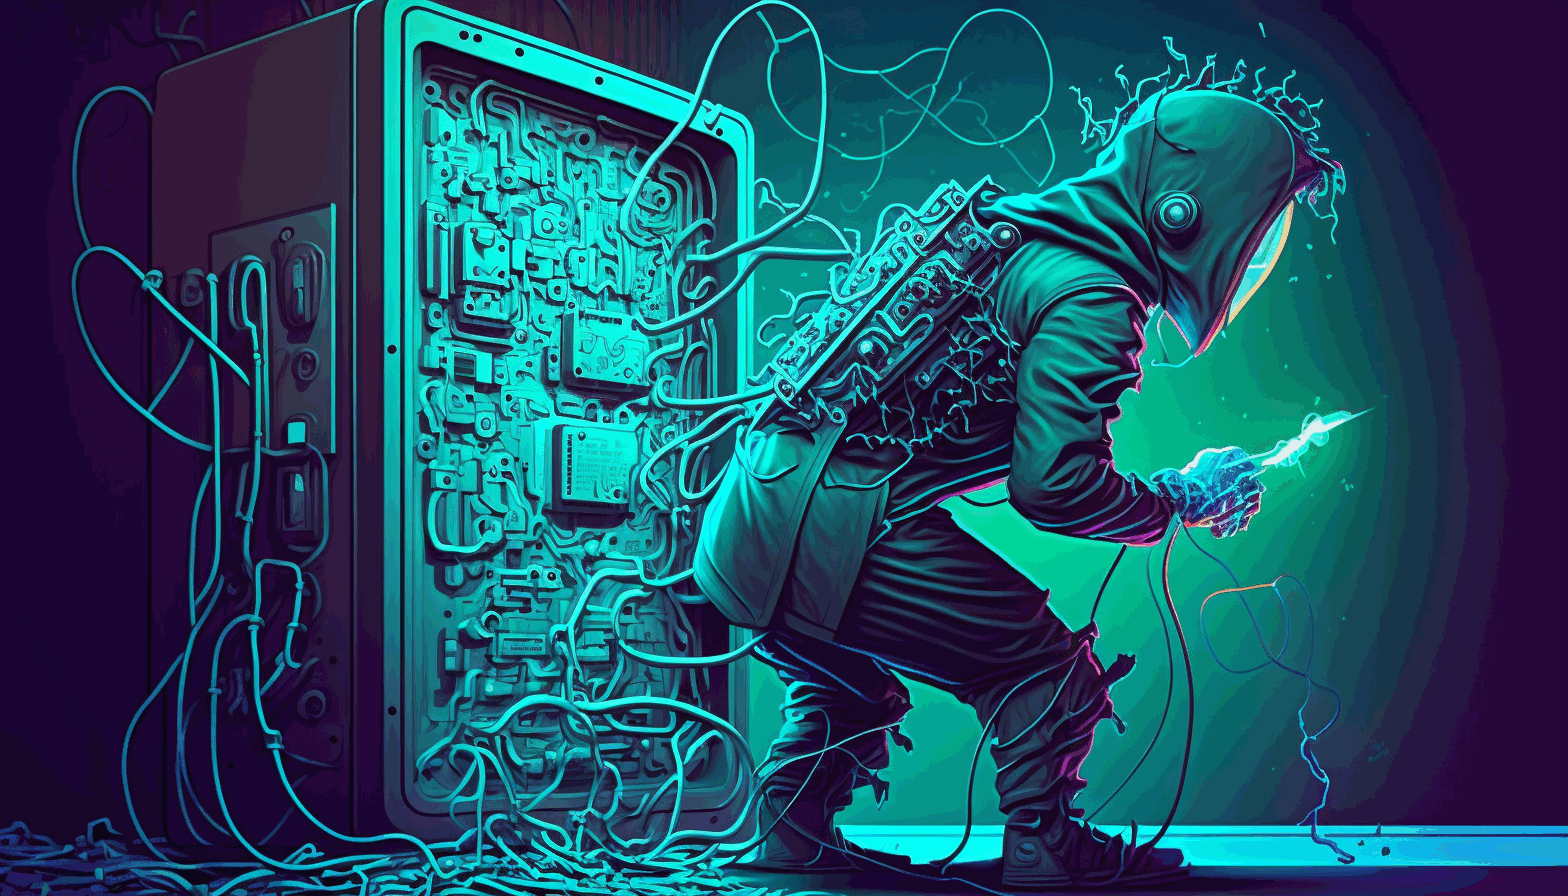 An animated image of a hacker trying to break into a computer system protected by RSA encryption, but then failing as a quantum computer solves the encryption in seconds in the background.